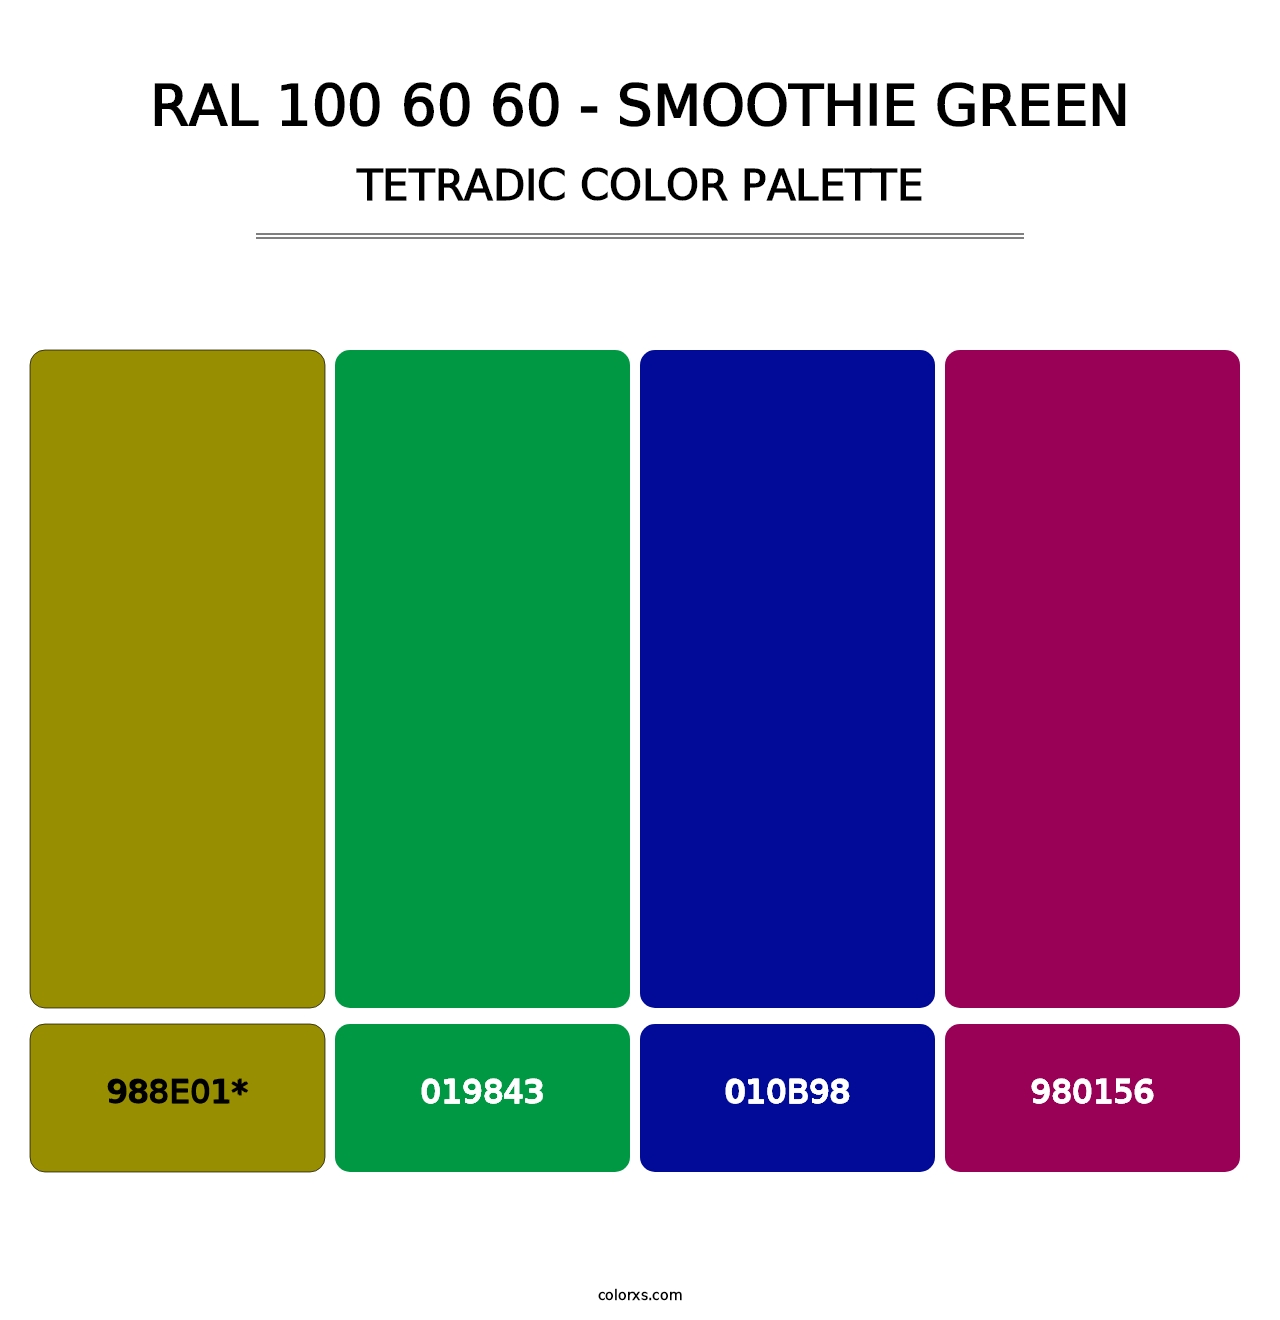 RAL 100 60 60 - Smoothie Green - Tetradic Color Palette